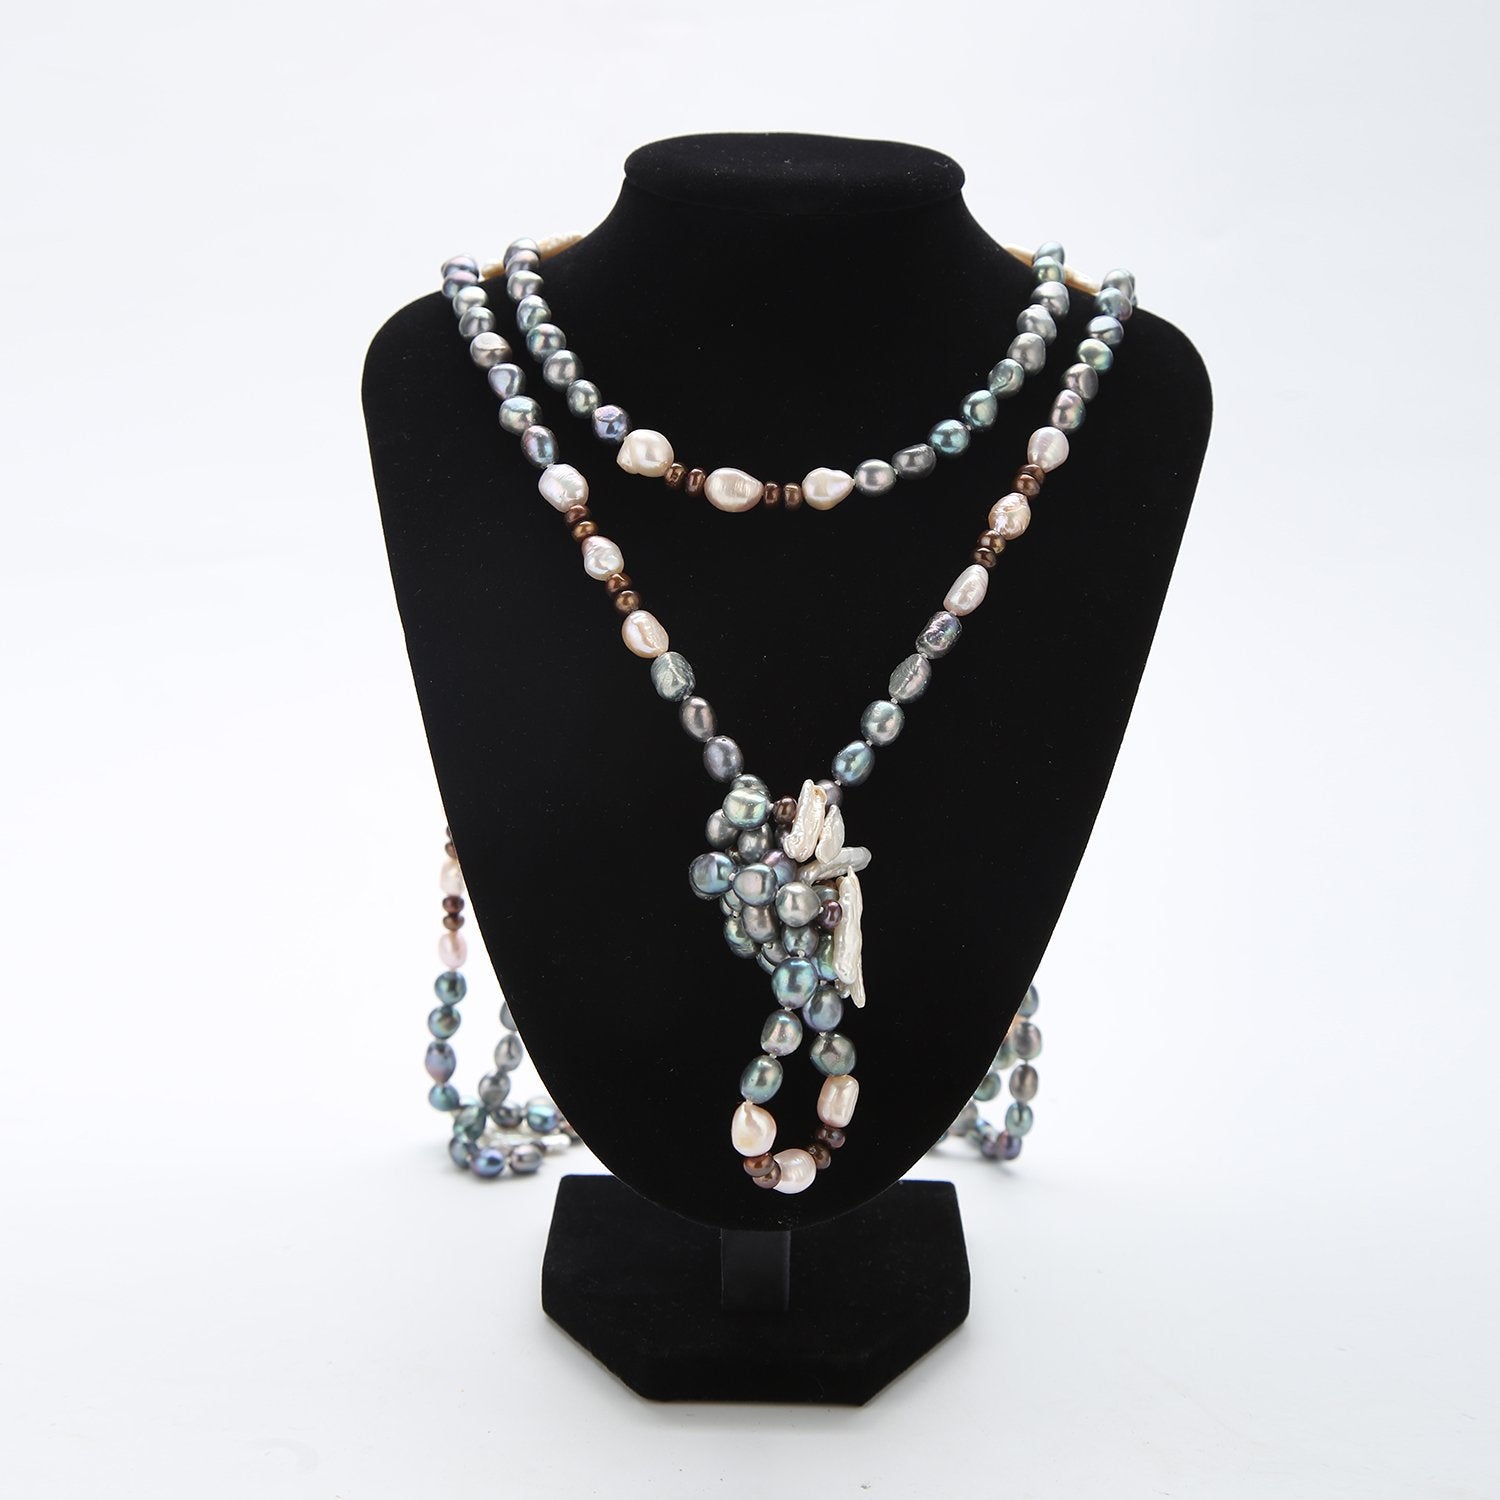 What to Wear with Pearls: Necklaces, Earrings & More | Pearls.co.uk